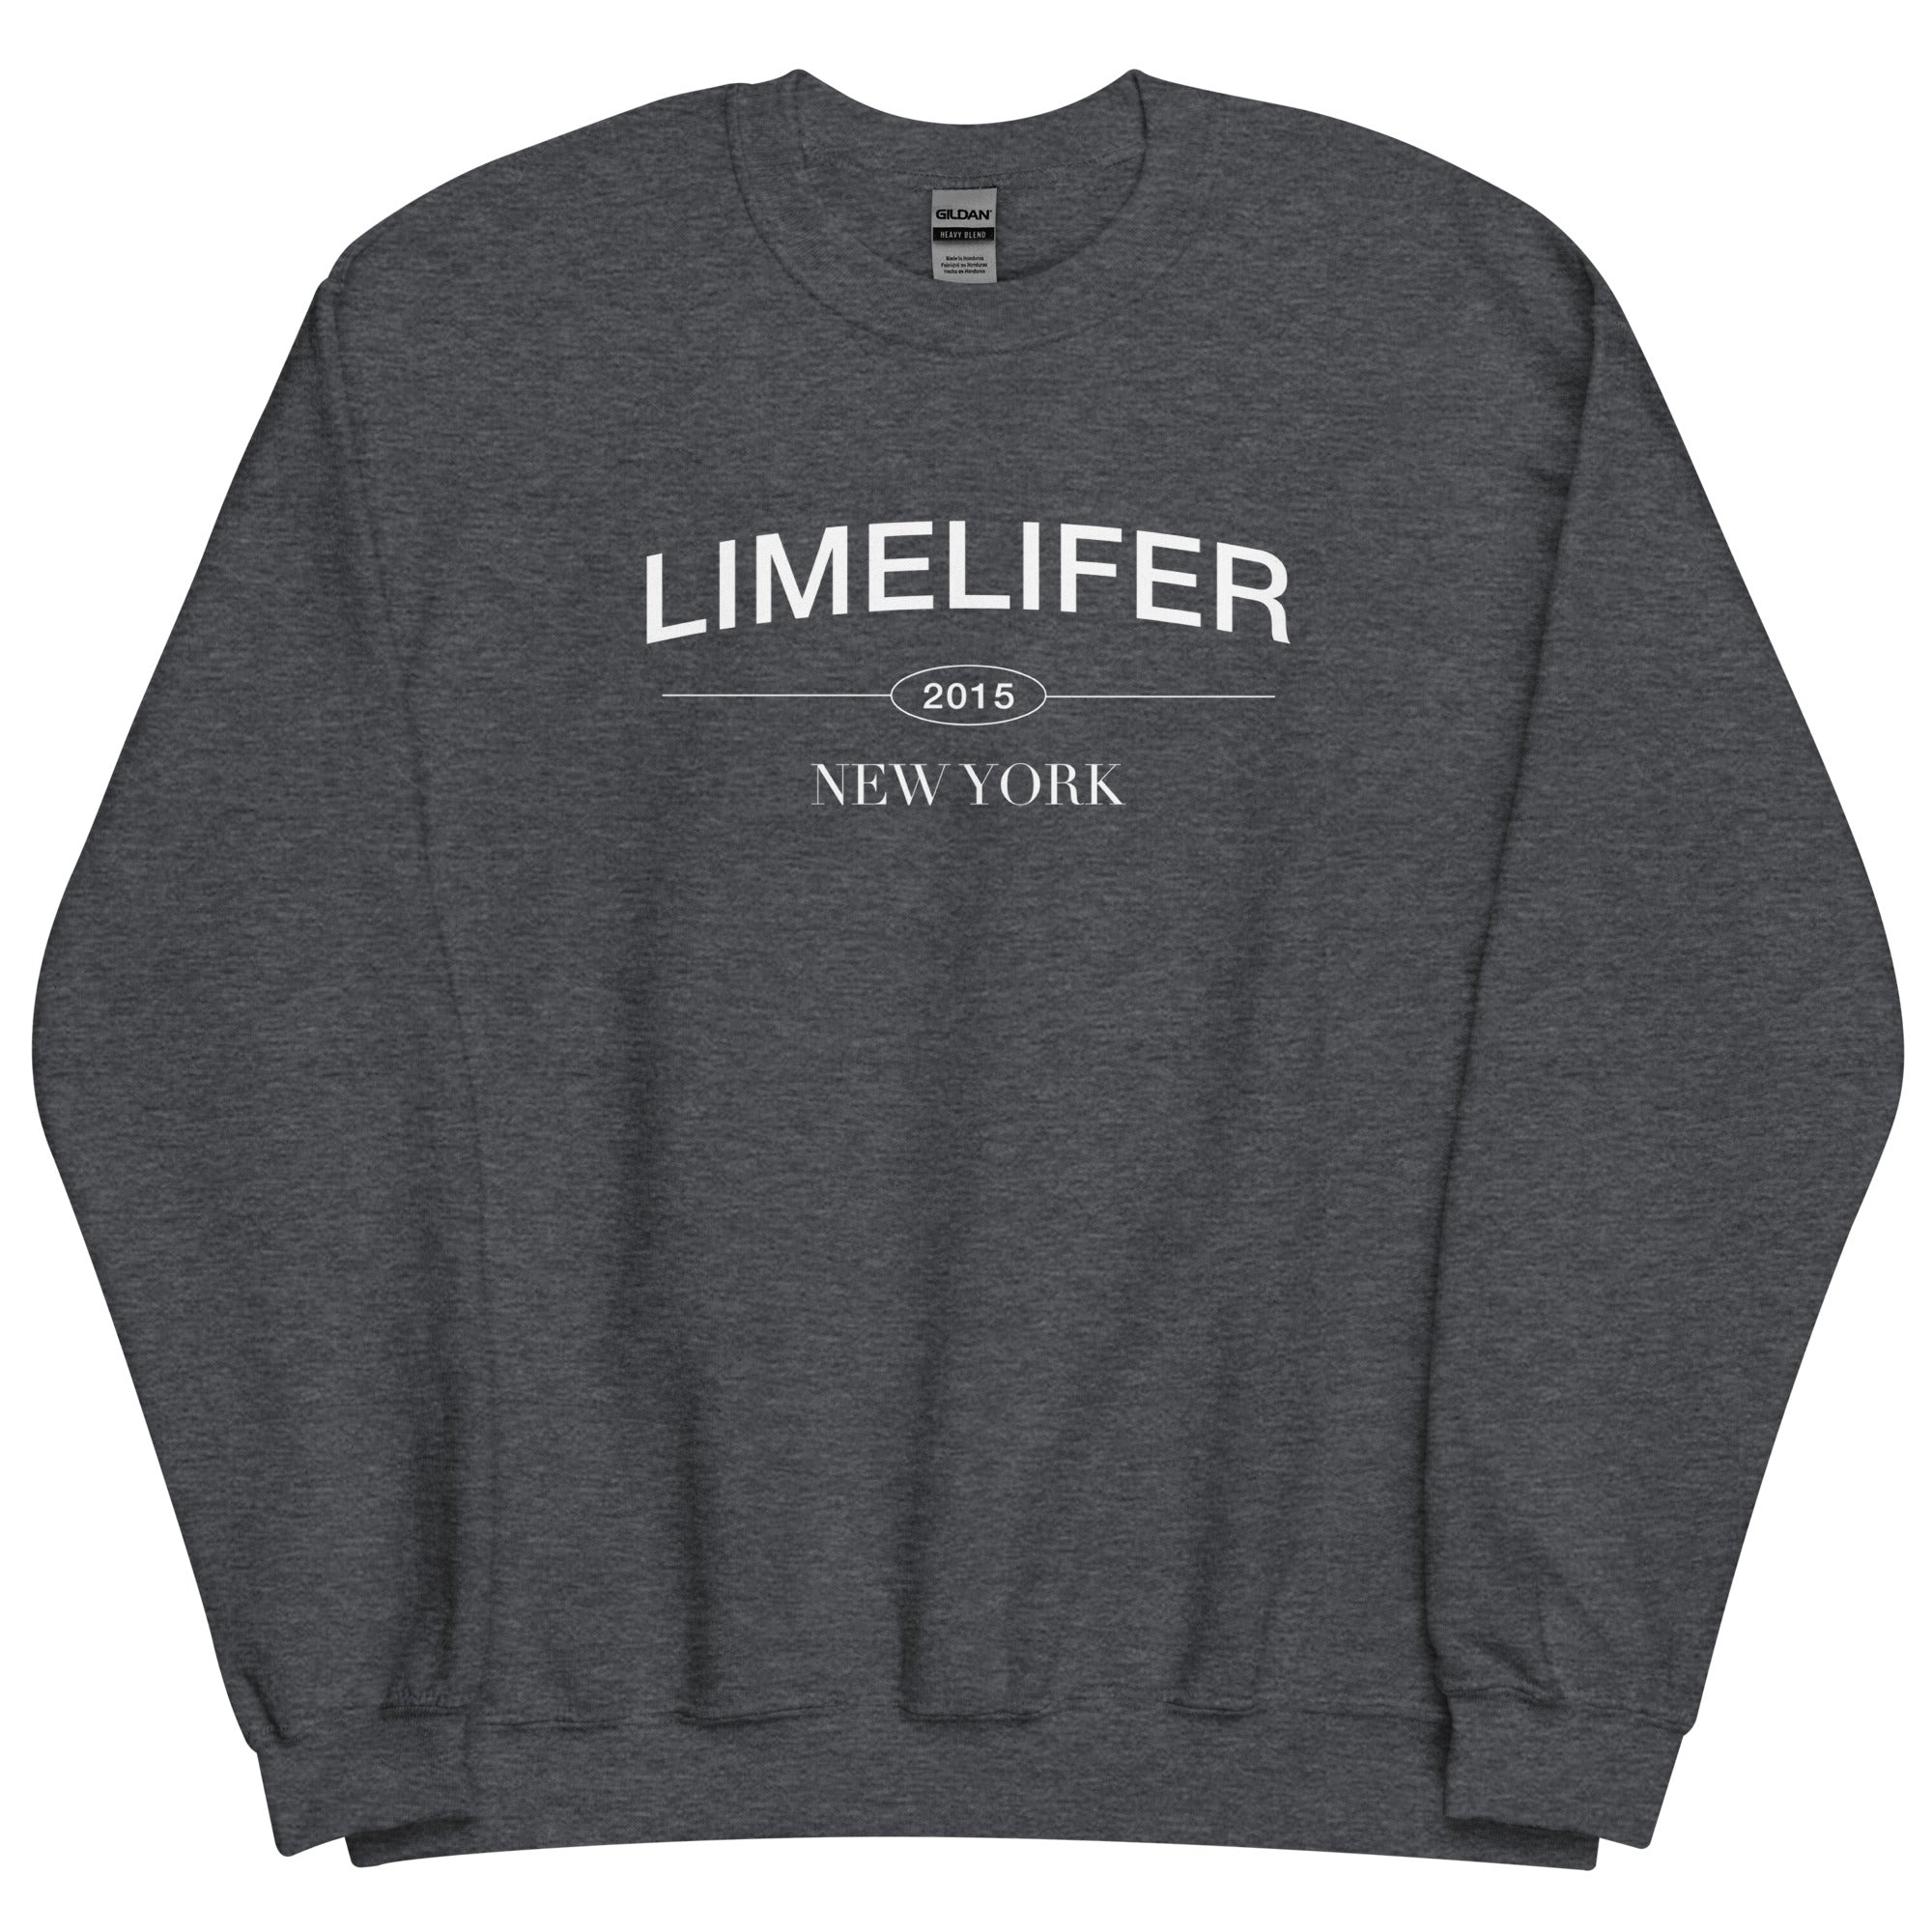 LIMELIFER NY - Unisex Sweatshirt in Dark Heather, Black and Military Green